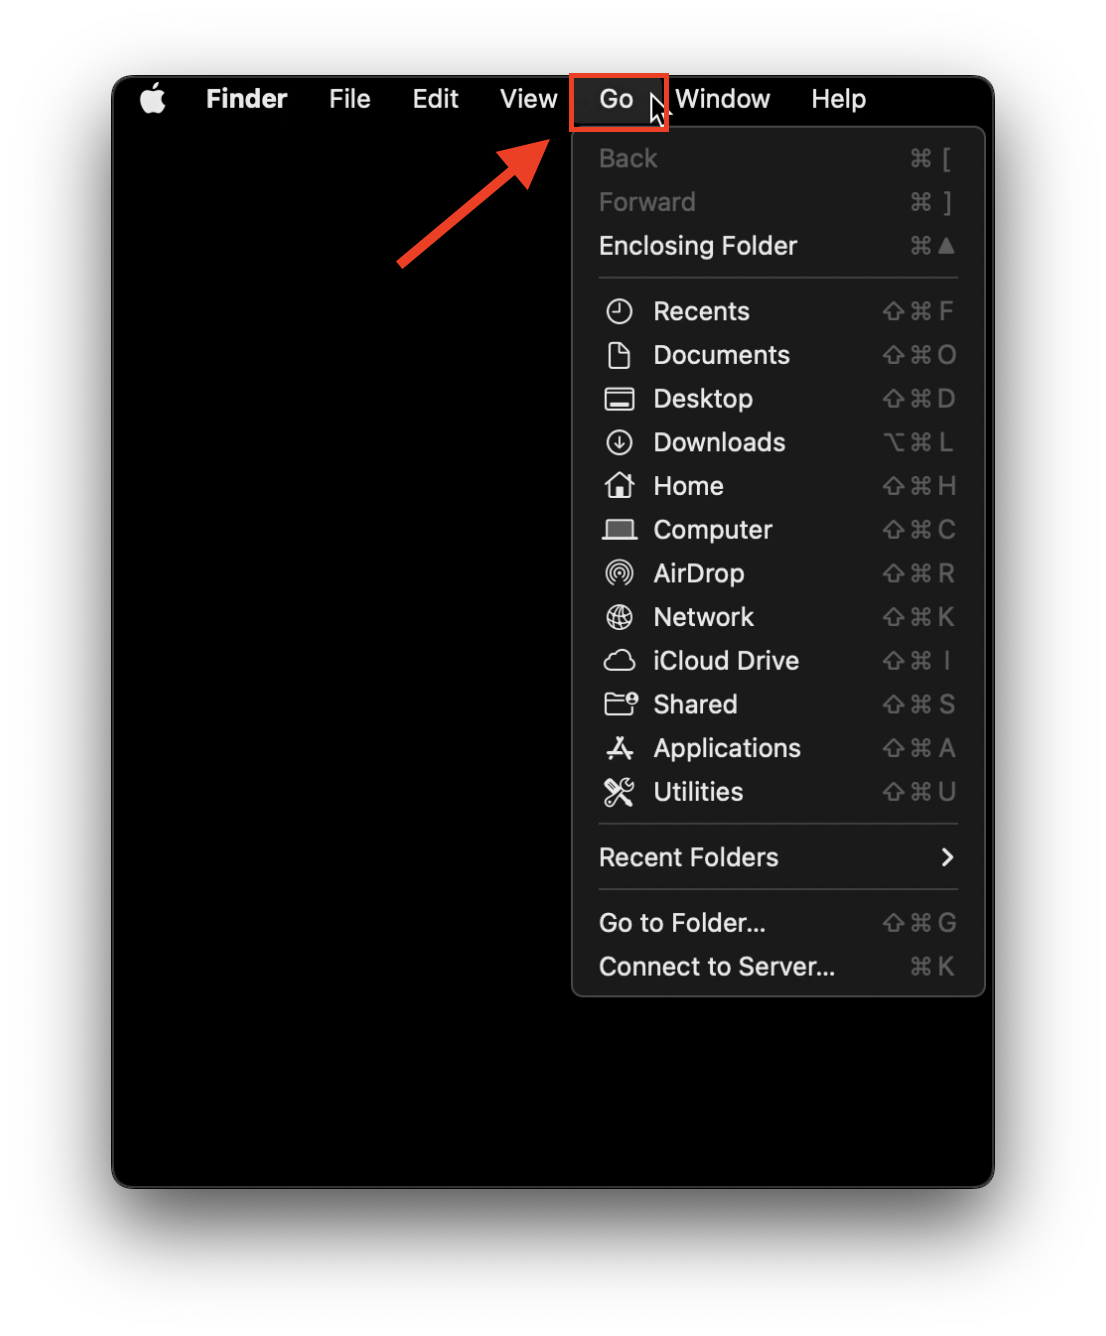 Drop-down selection from the Go menu